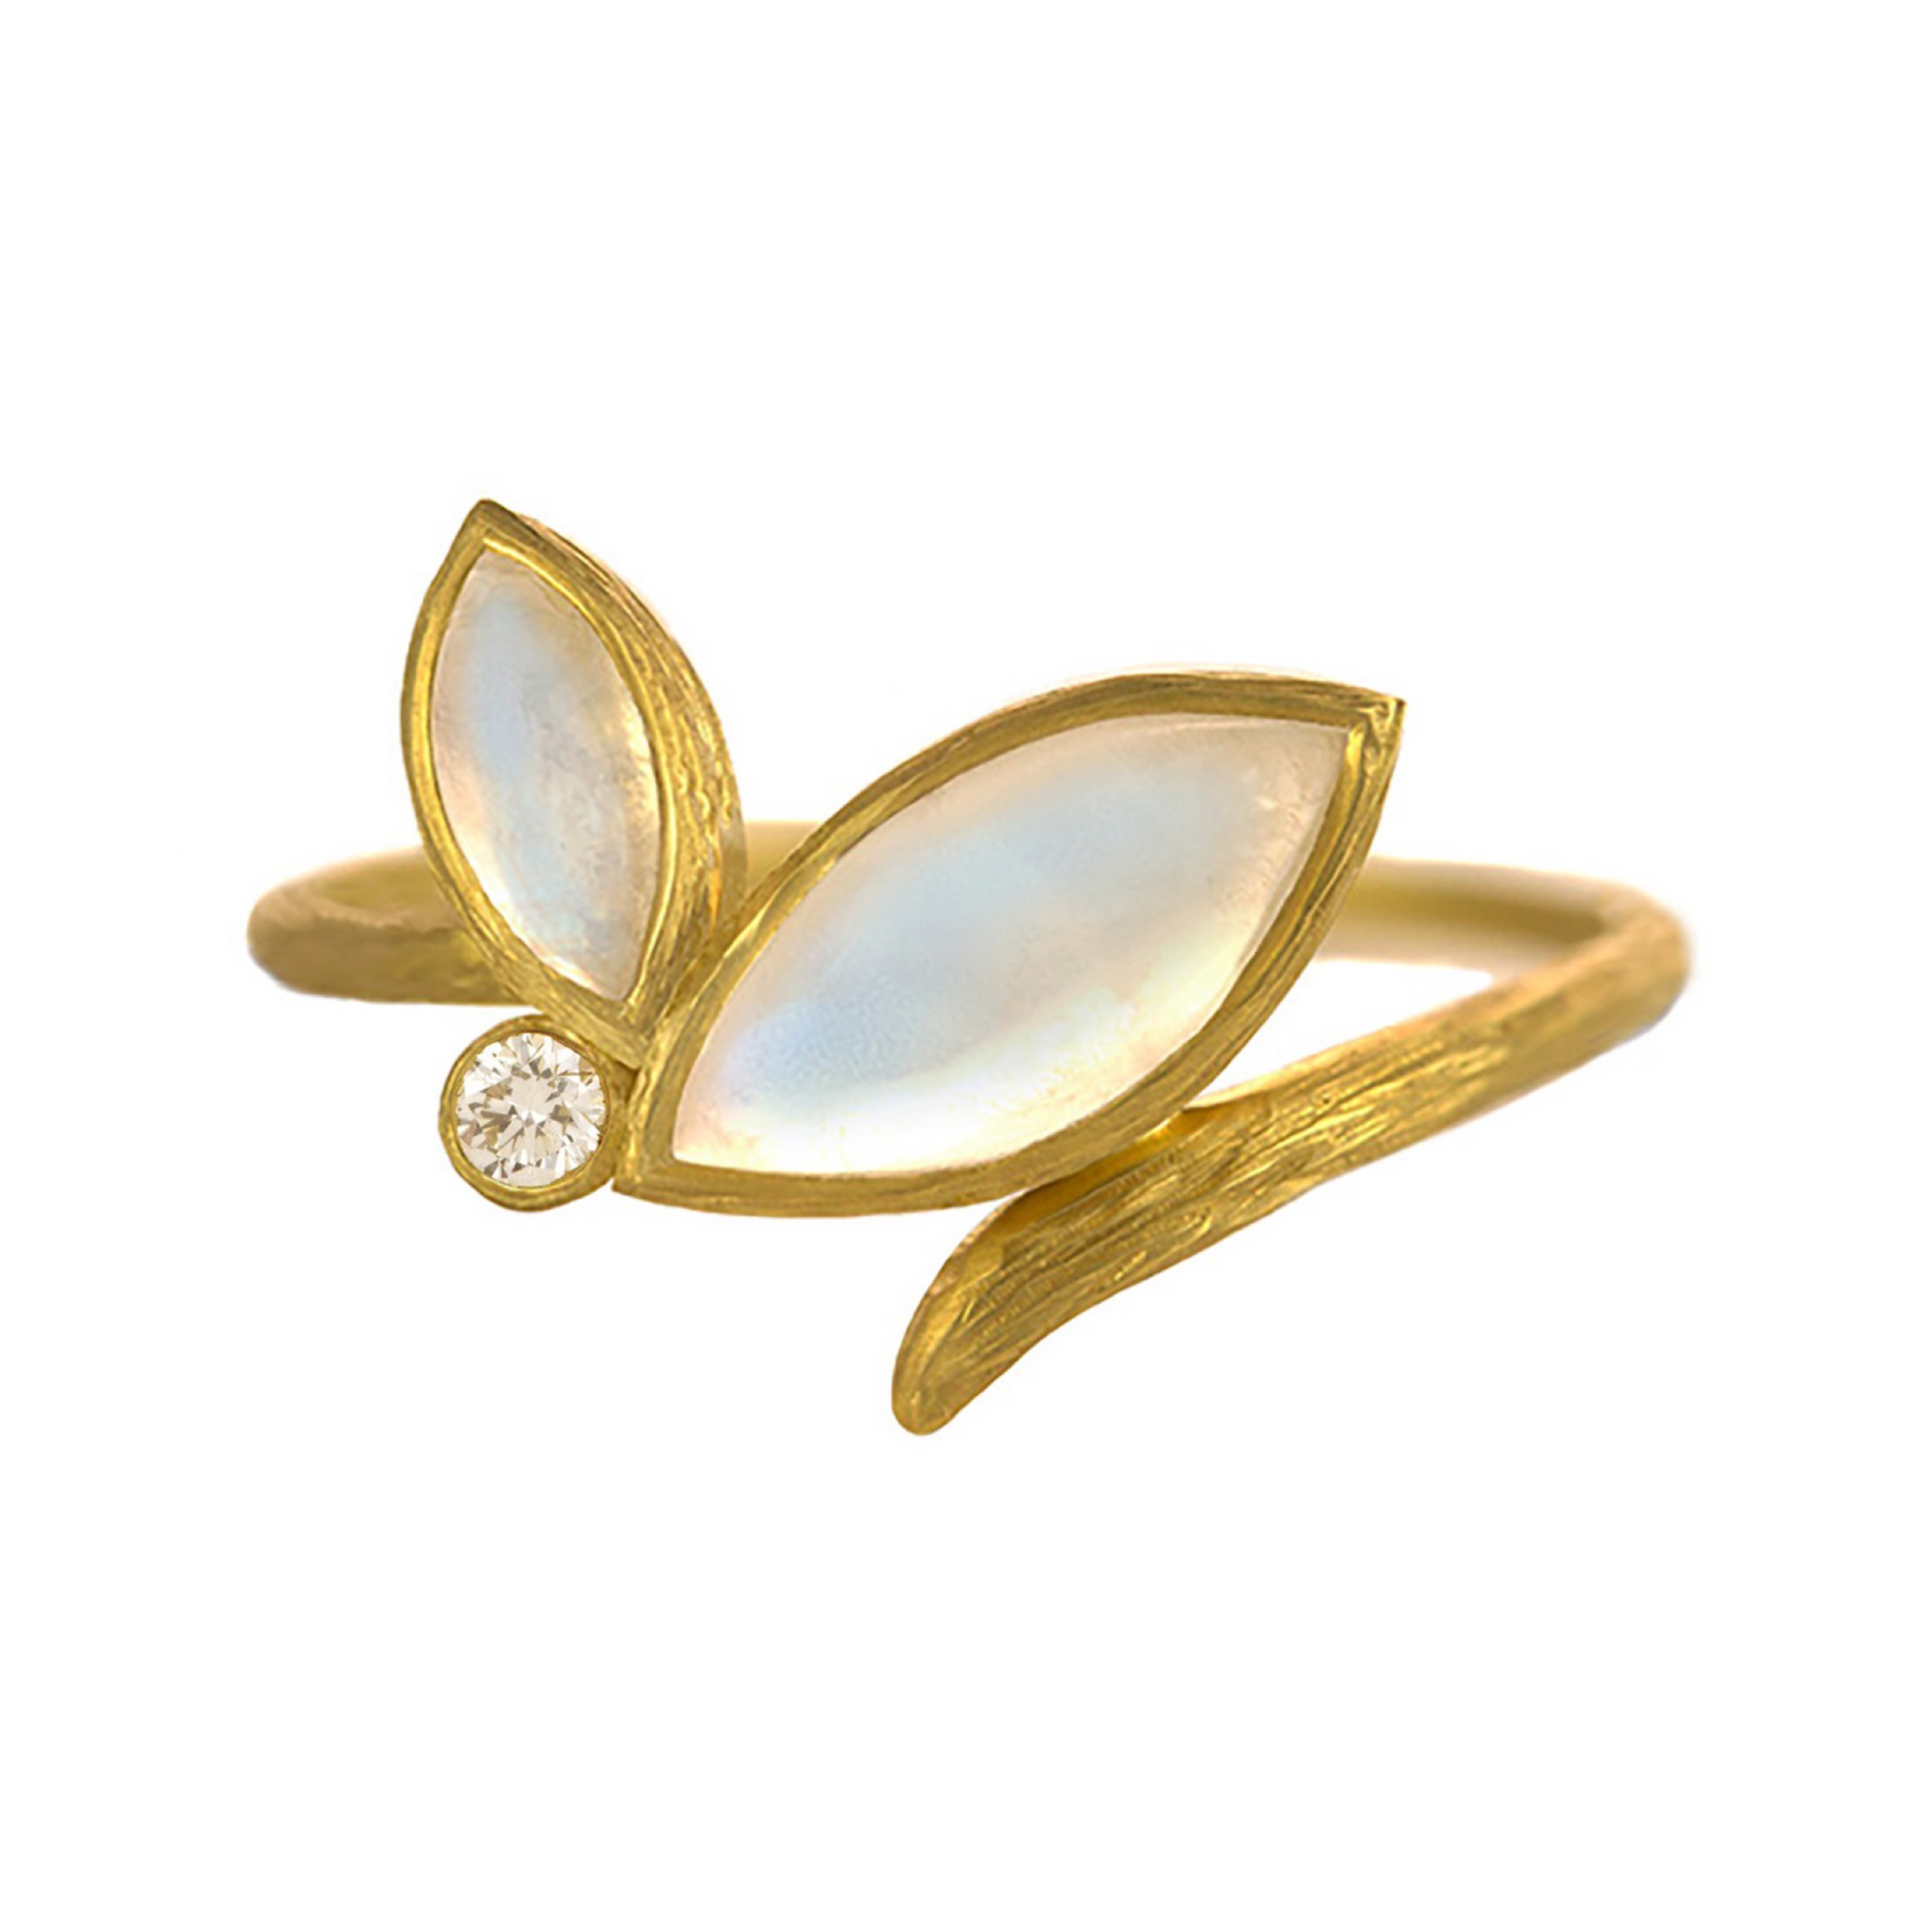 Vine Double Marquis Moonstone Ring by Laurie Kaiser available at Talisman Collection Fine Jewelers in El Dorado Hills, CA and online. The Vine Double Marquis Moonstone Ring showcases two beautiful rainbow moonstones set on an elegant 18k yellow gold band, accented by a 0.04 cts white diamond. This lovely ring has an understated elegance making it perfect to everyday. 